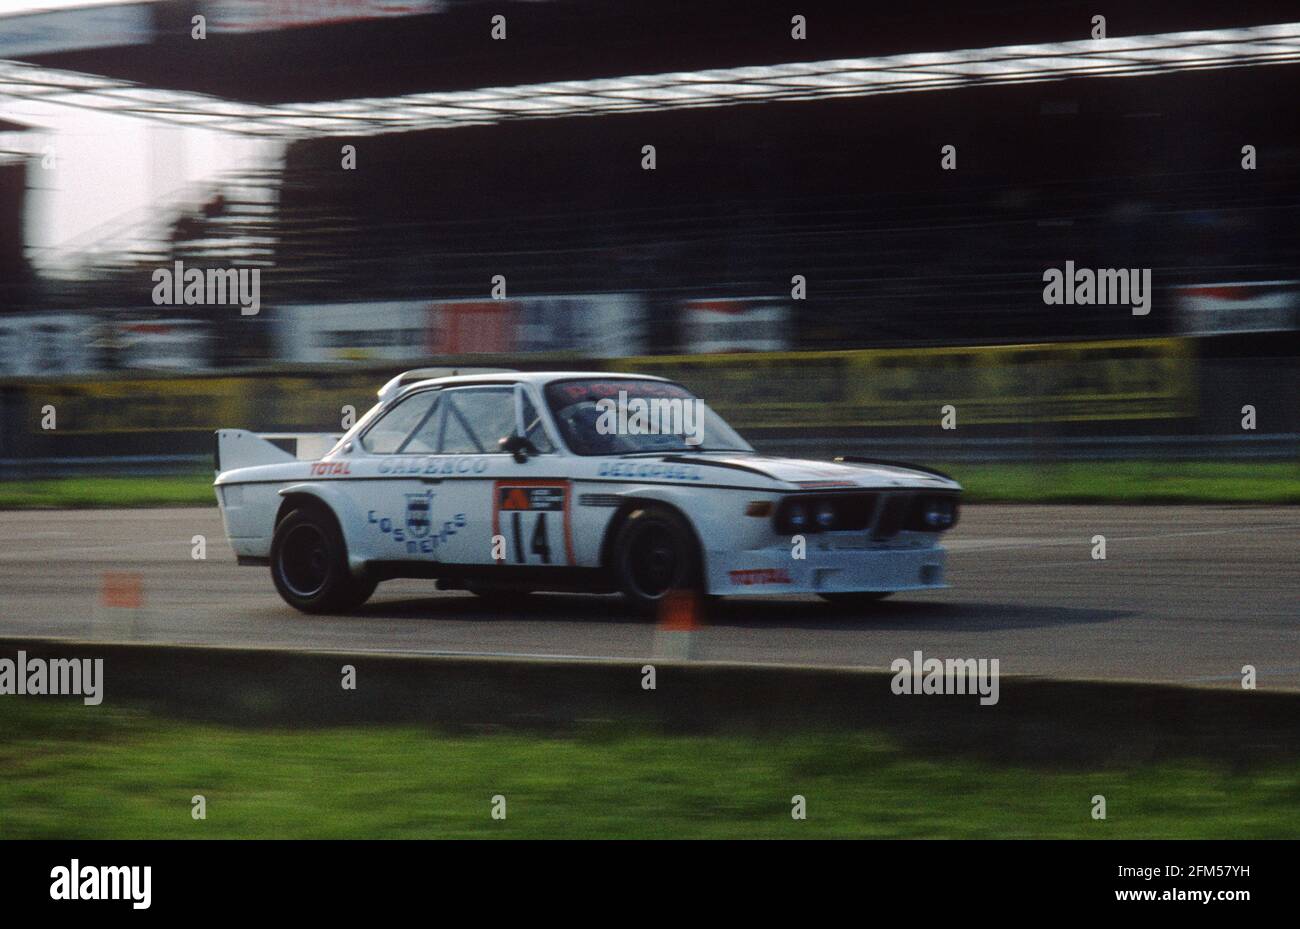 The Fitzpatrick - Lafosse - Carlier BMW 3.0 CSL at speed during the 1976 ETCC Tourist Trophy race at Silverstone. Stock Photo